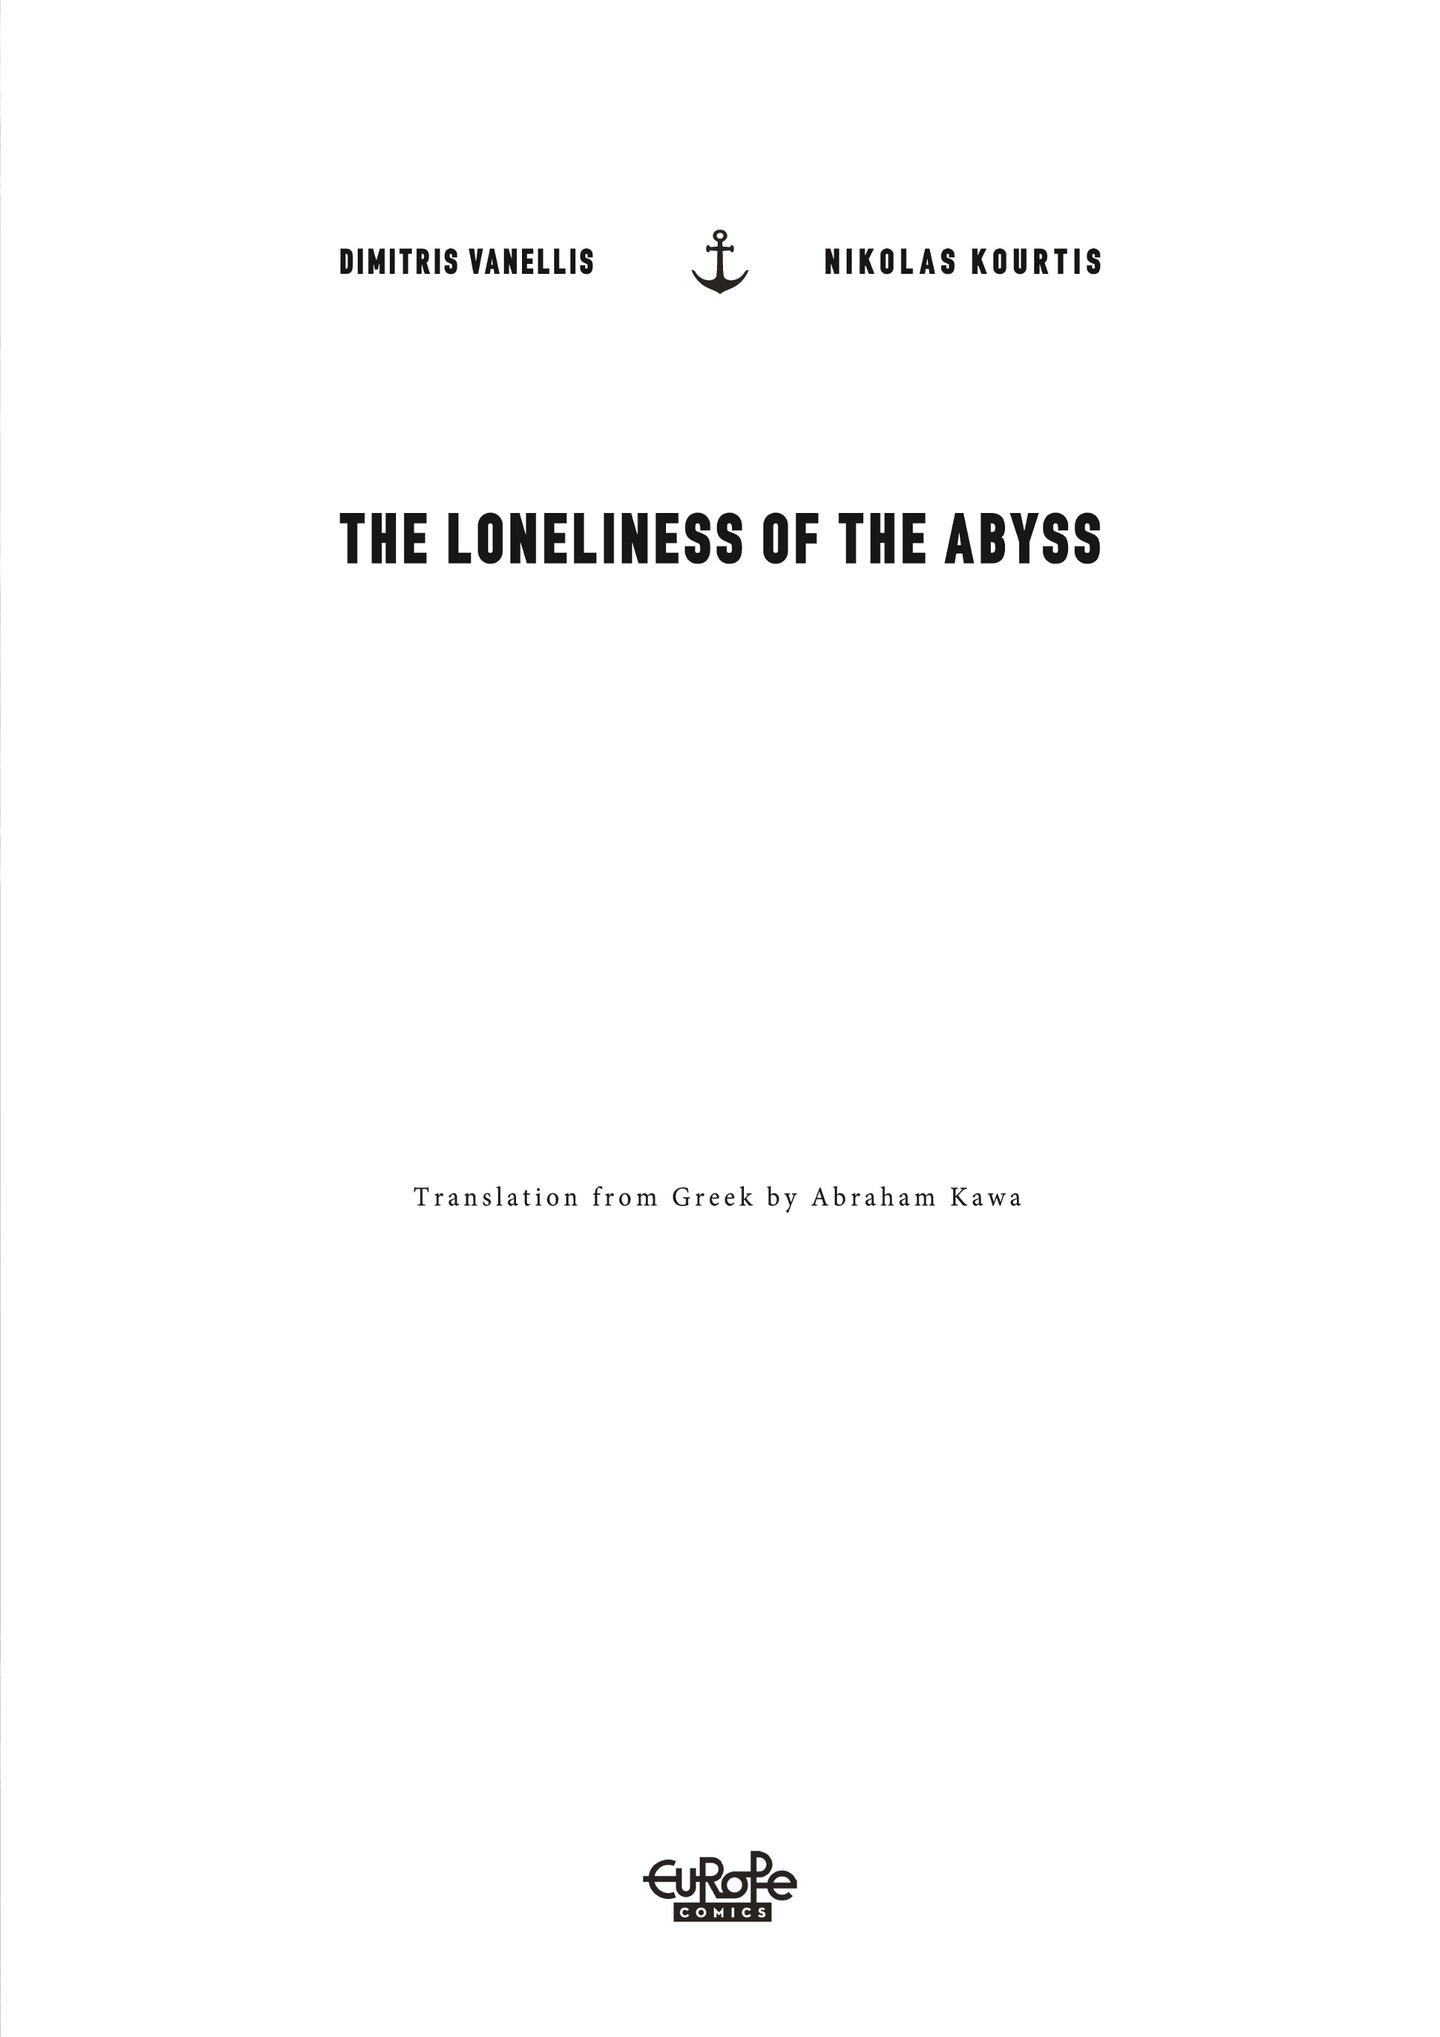 Read online The Loneliness of the Abyss comic -  Issue # TPB - 2